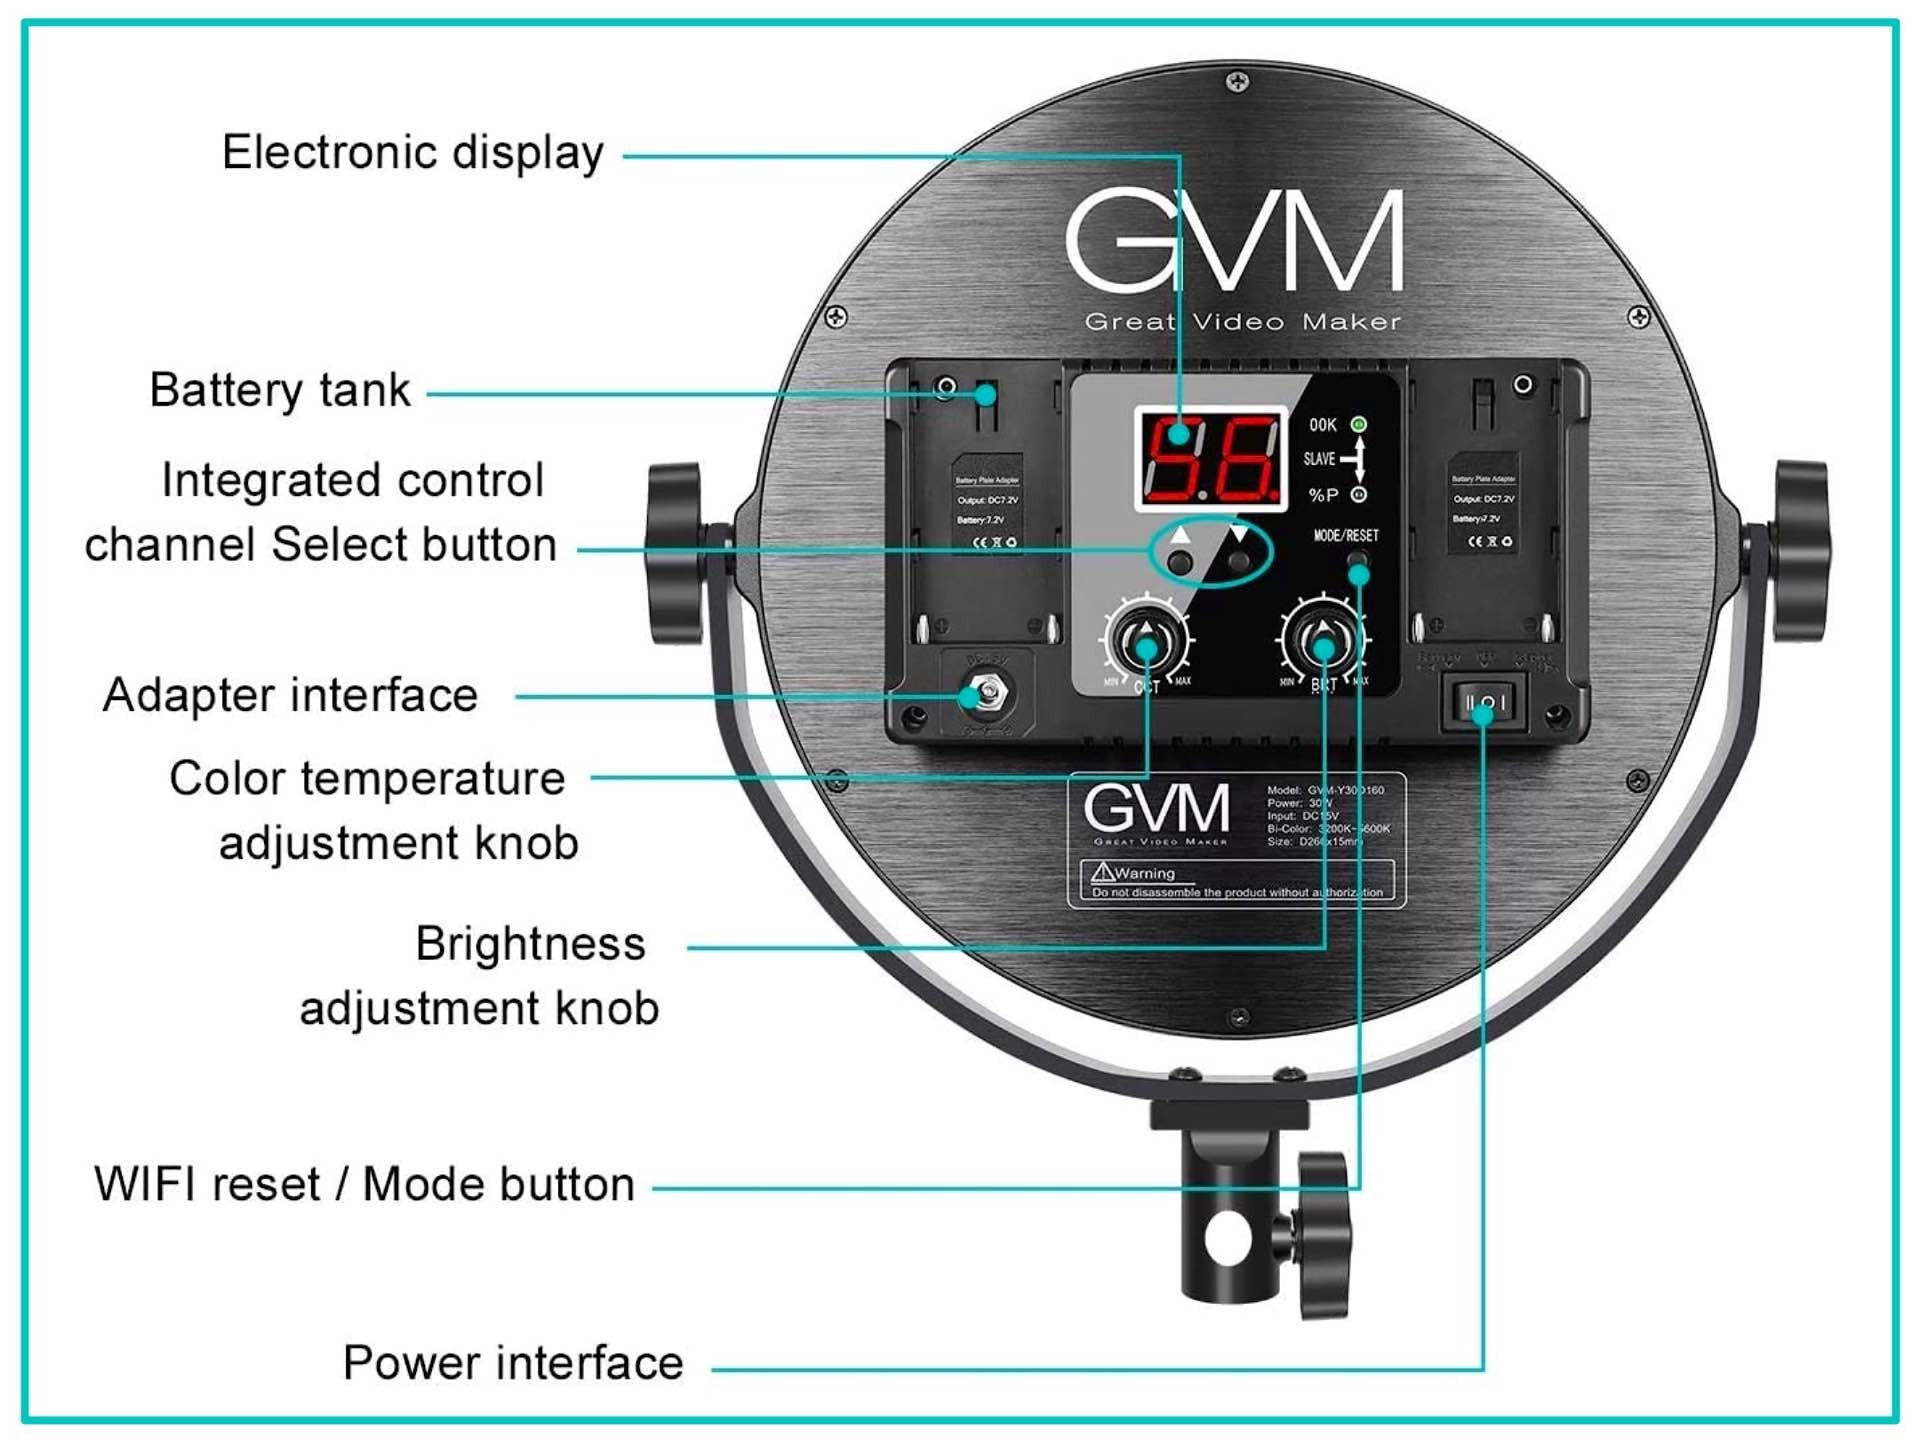 gvm-desk-mounted-led-light-panel-rear-features